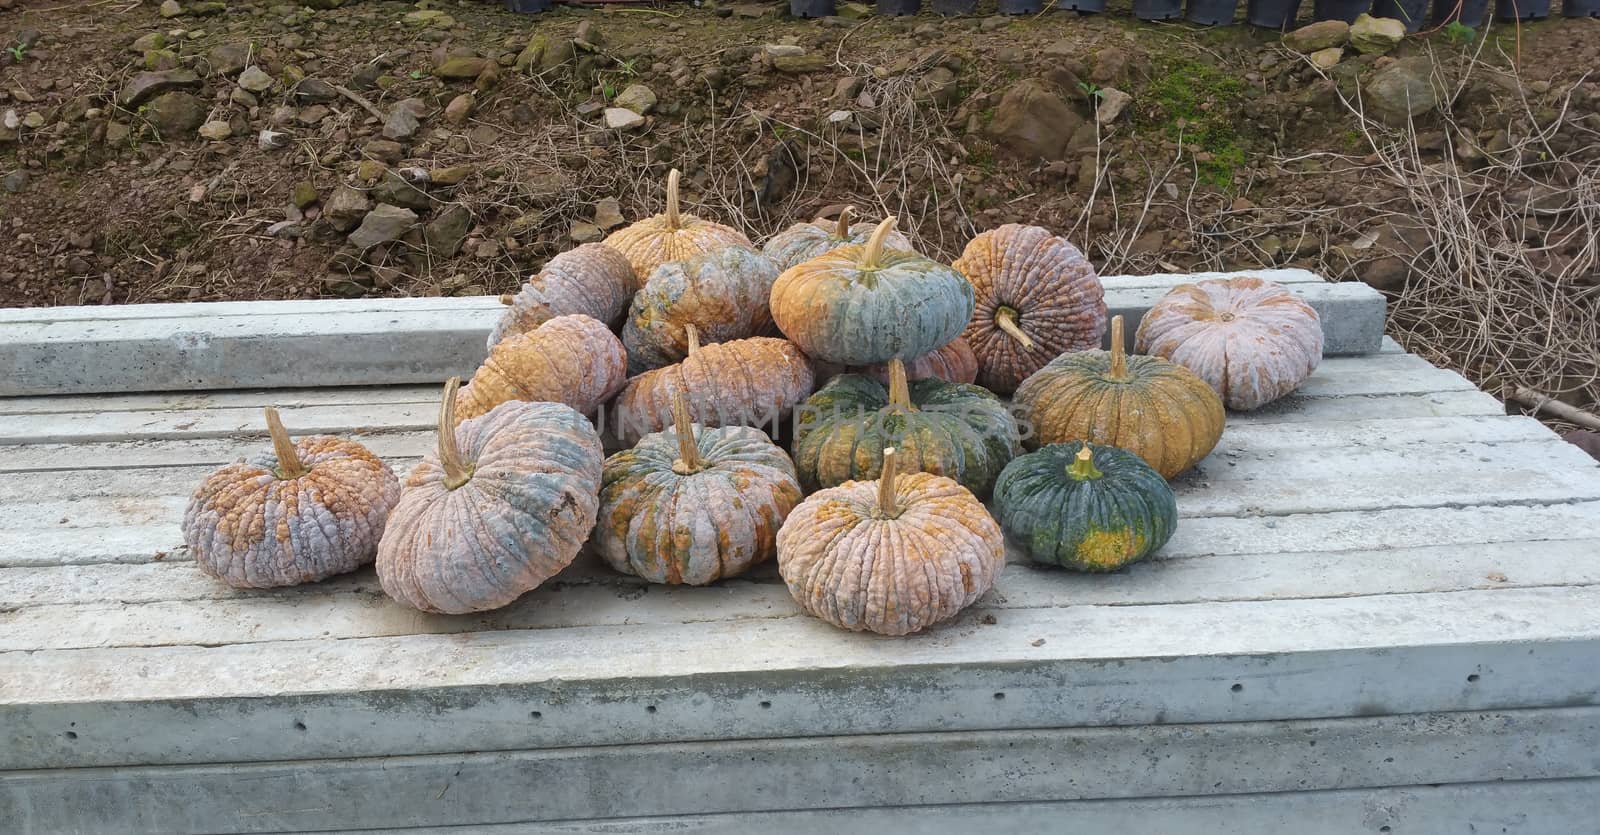 Pumpkins stack on the bench. Taken from the rural site of Nan province, Thailand. Just reap and ready to sell.